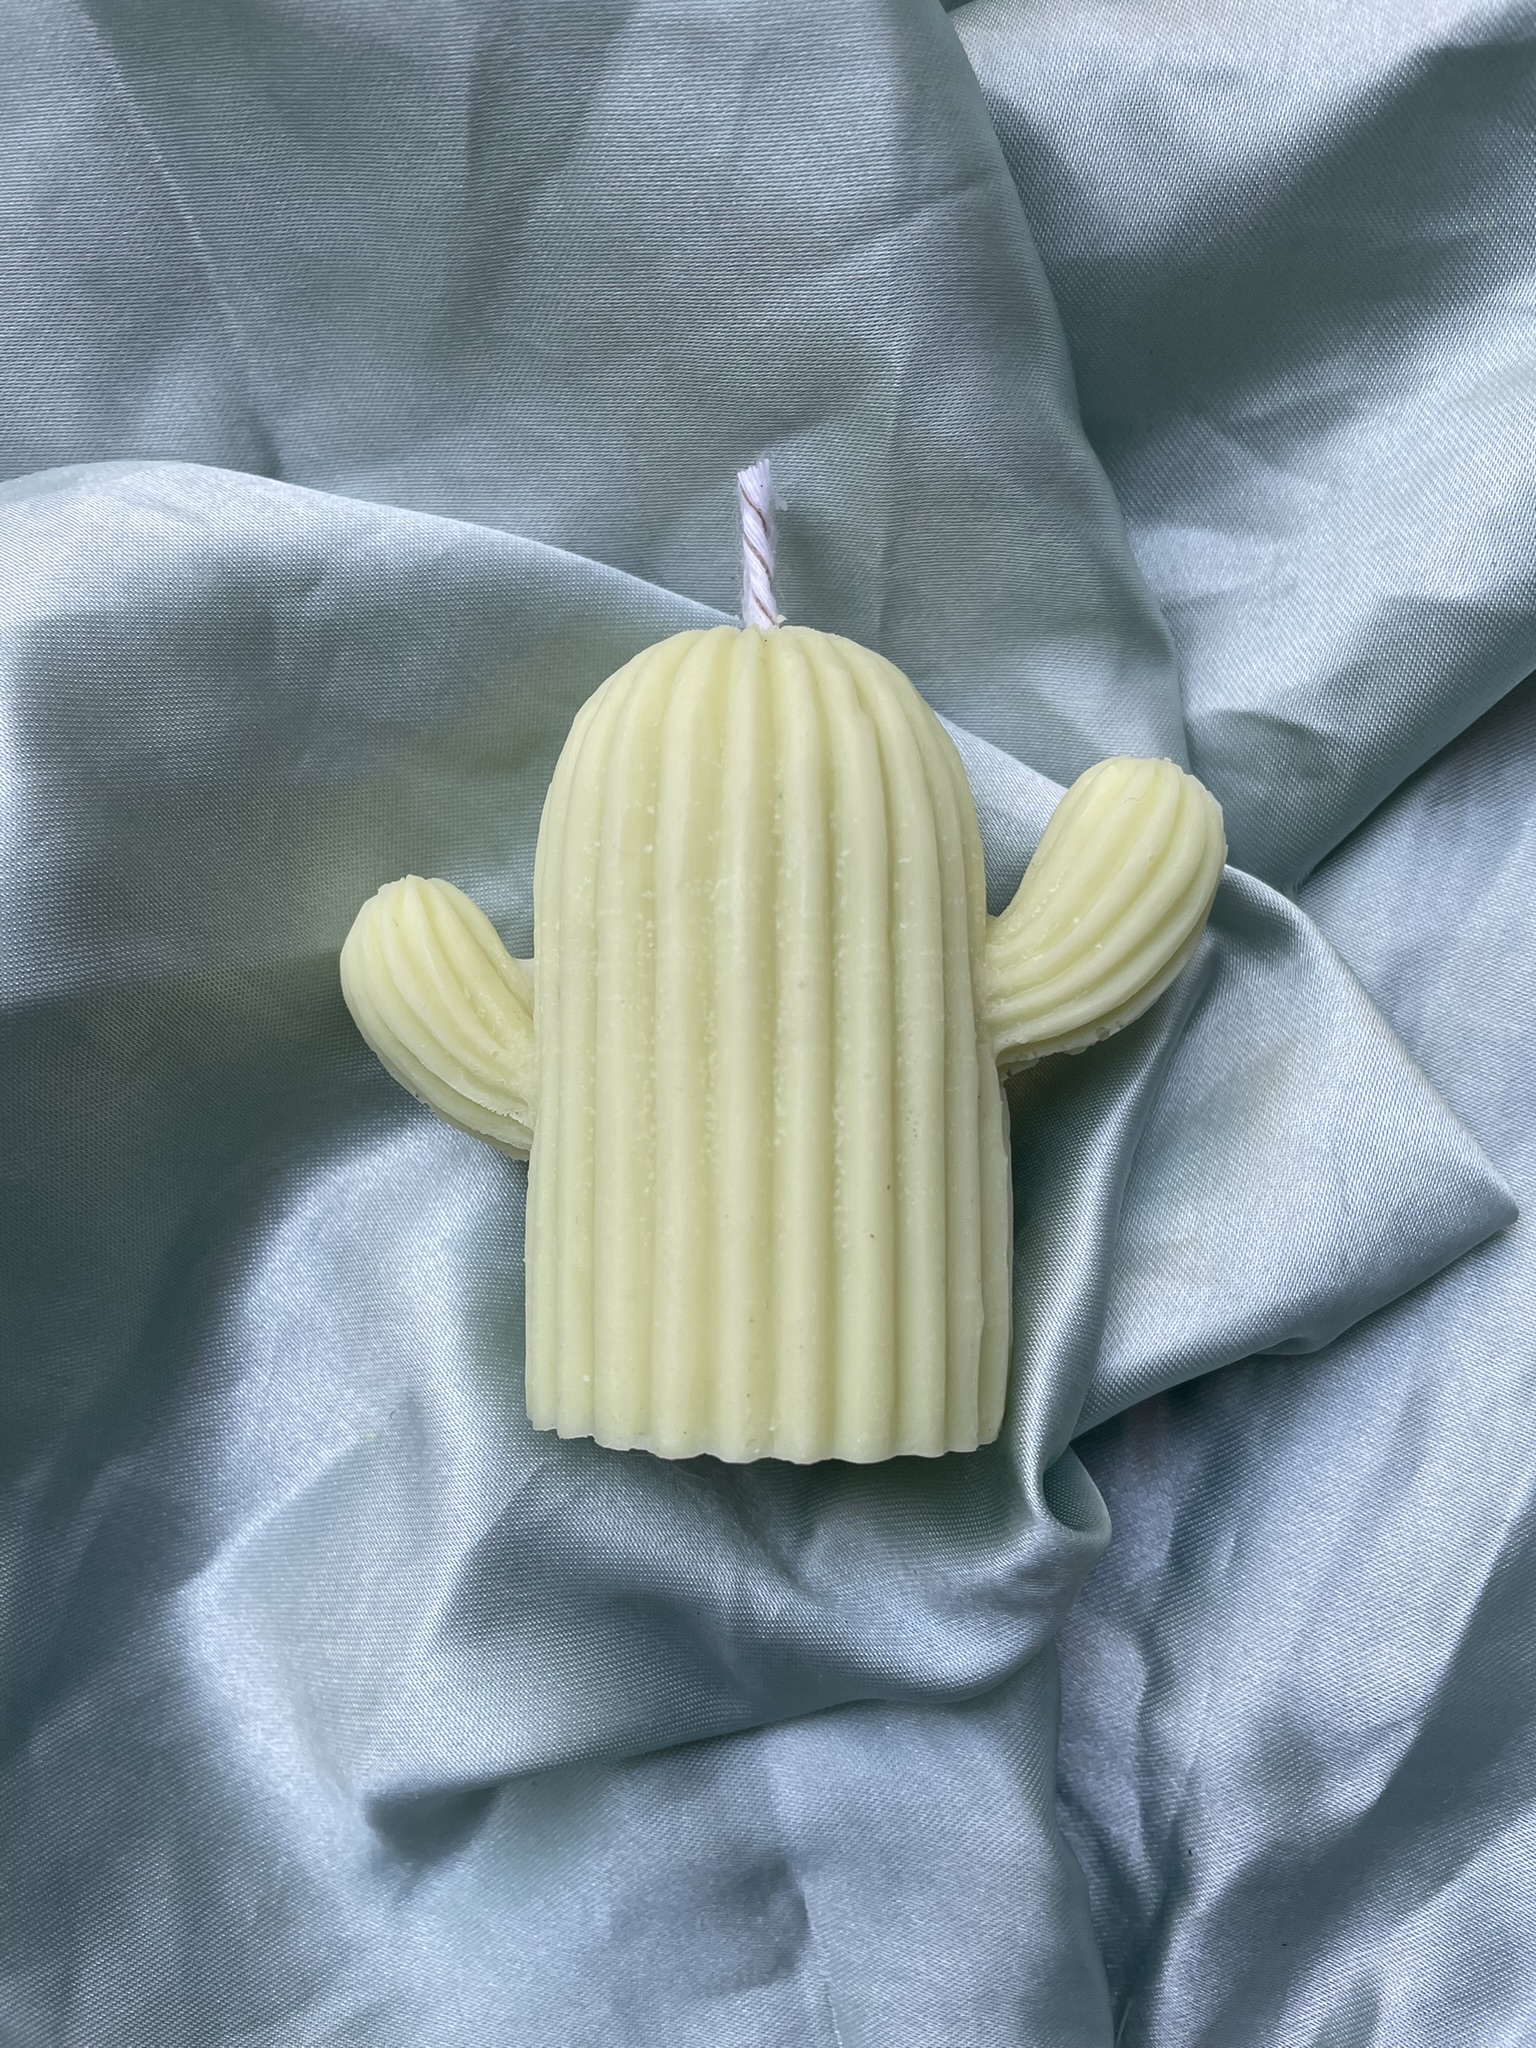 made by mabel, hand poured soy wax cacti candle